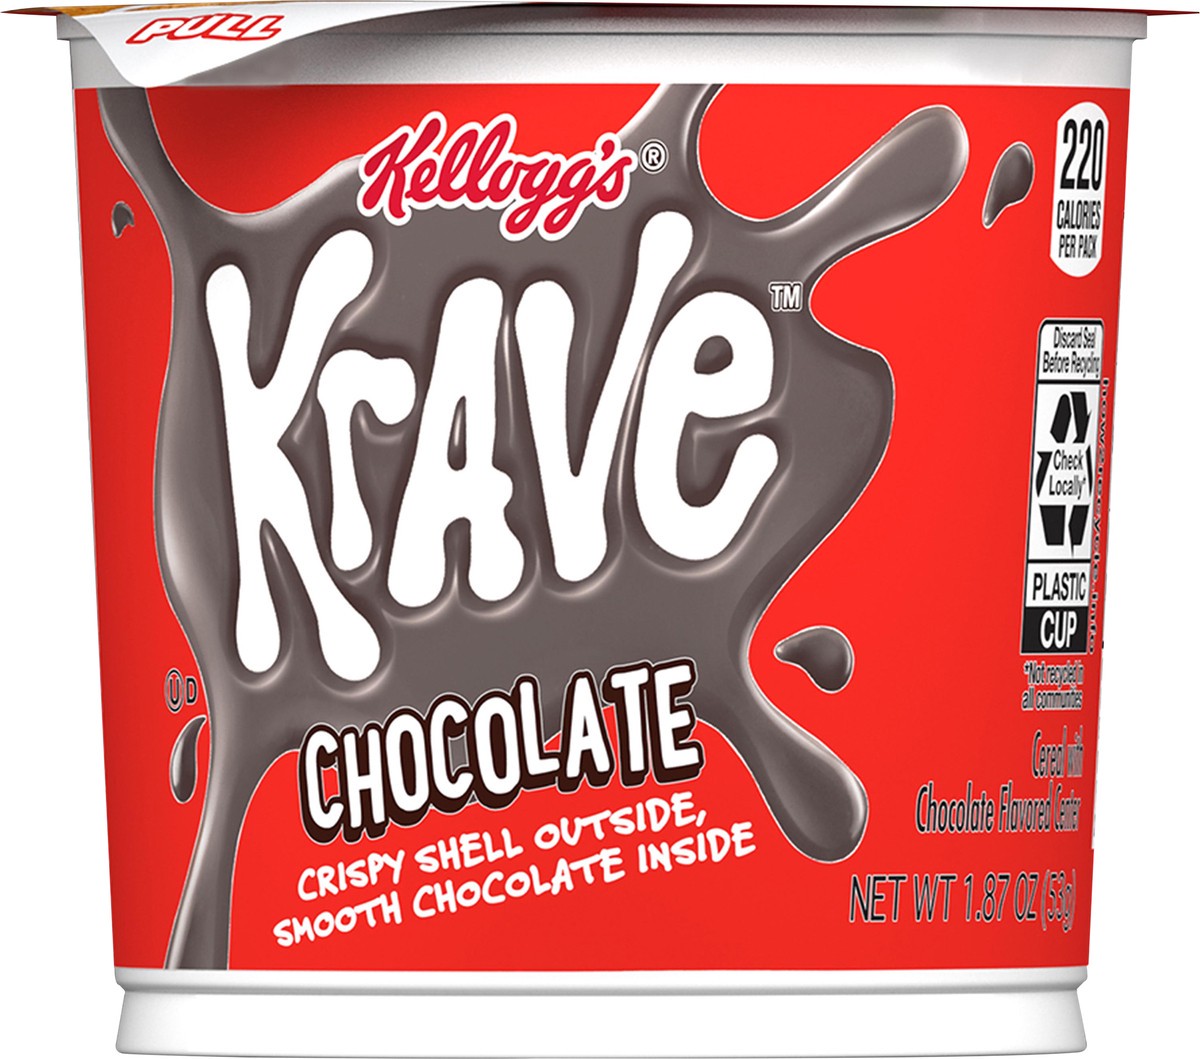 slide 6 of 6, Krave Kellogg's Krave Cold Breakfast Cereal Cup, 7 Vitamins and Minerals, Kids Snacks, Chocolate, 1.87oz Cup, 1 Cup, 1.87 oz